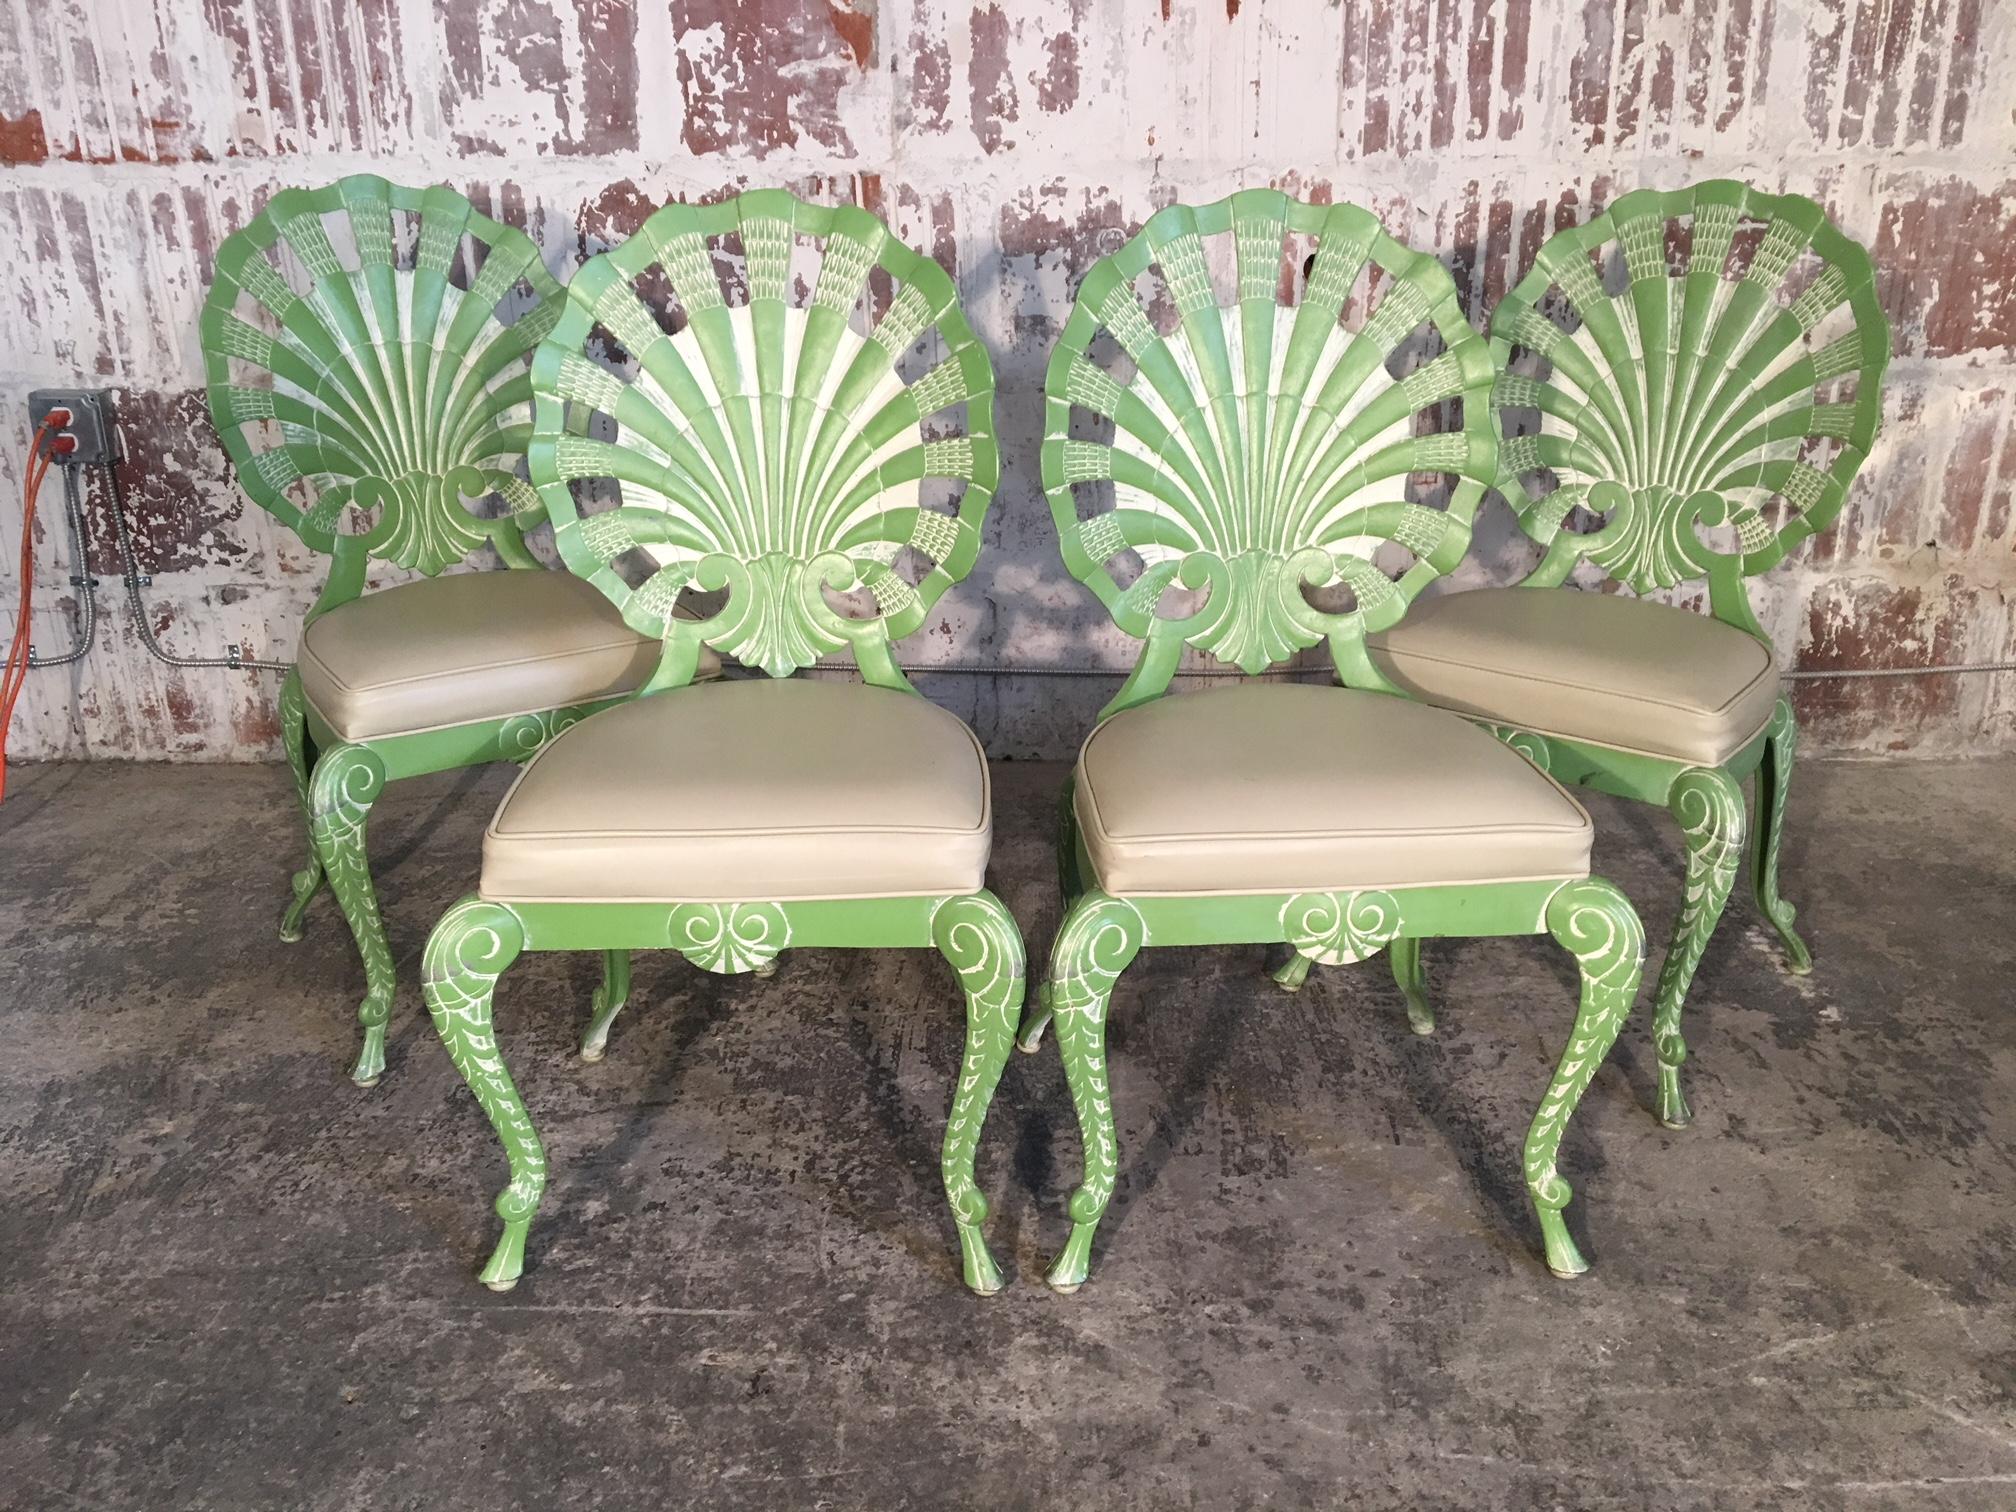 Set of 4 Brown Jordan cast aluminum grotto chairs in gorgeous green with white detailing. Beautiful shell back design in excellent vintage condition. Structurally sound with minor age appropriate signs of use. Vinyl upholstery in excellent